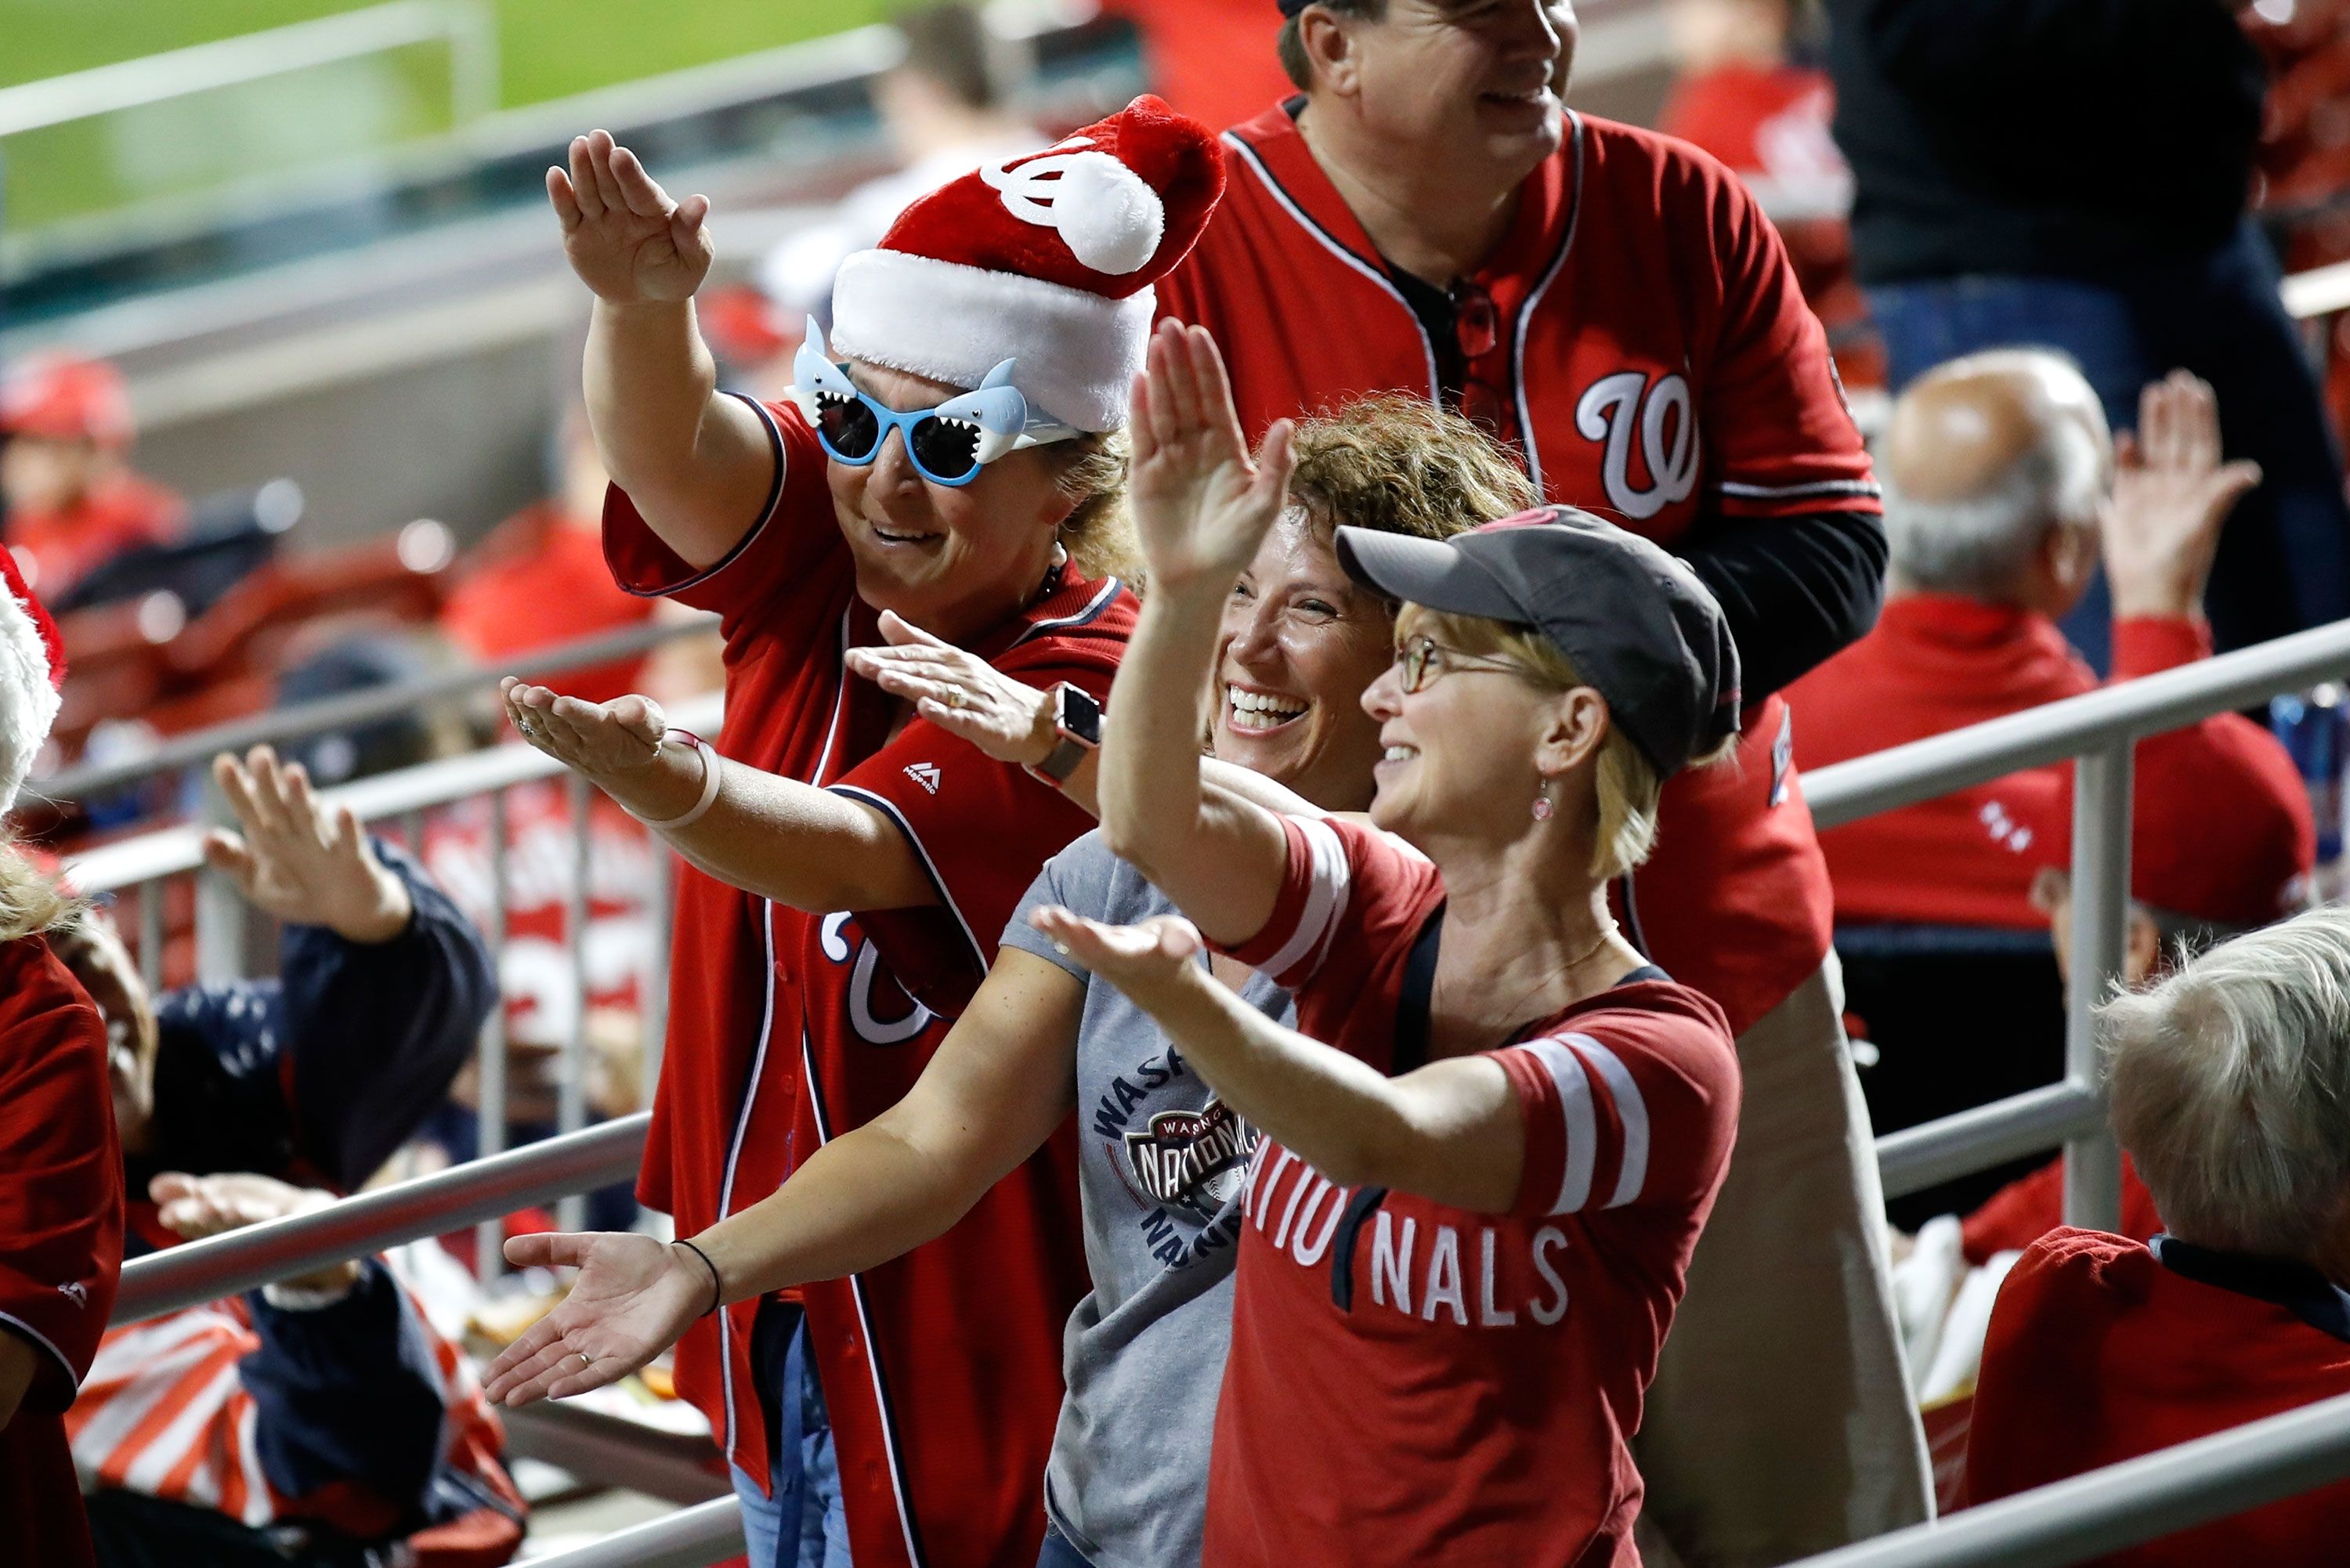 Who are the Washington Nationals?